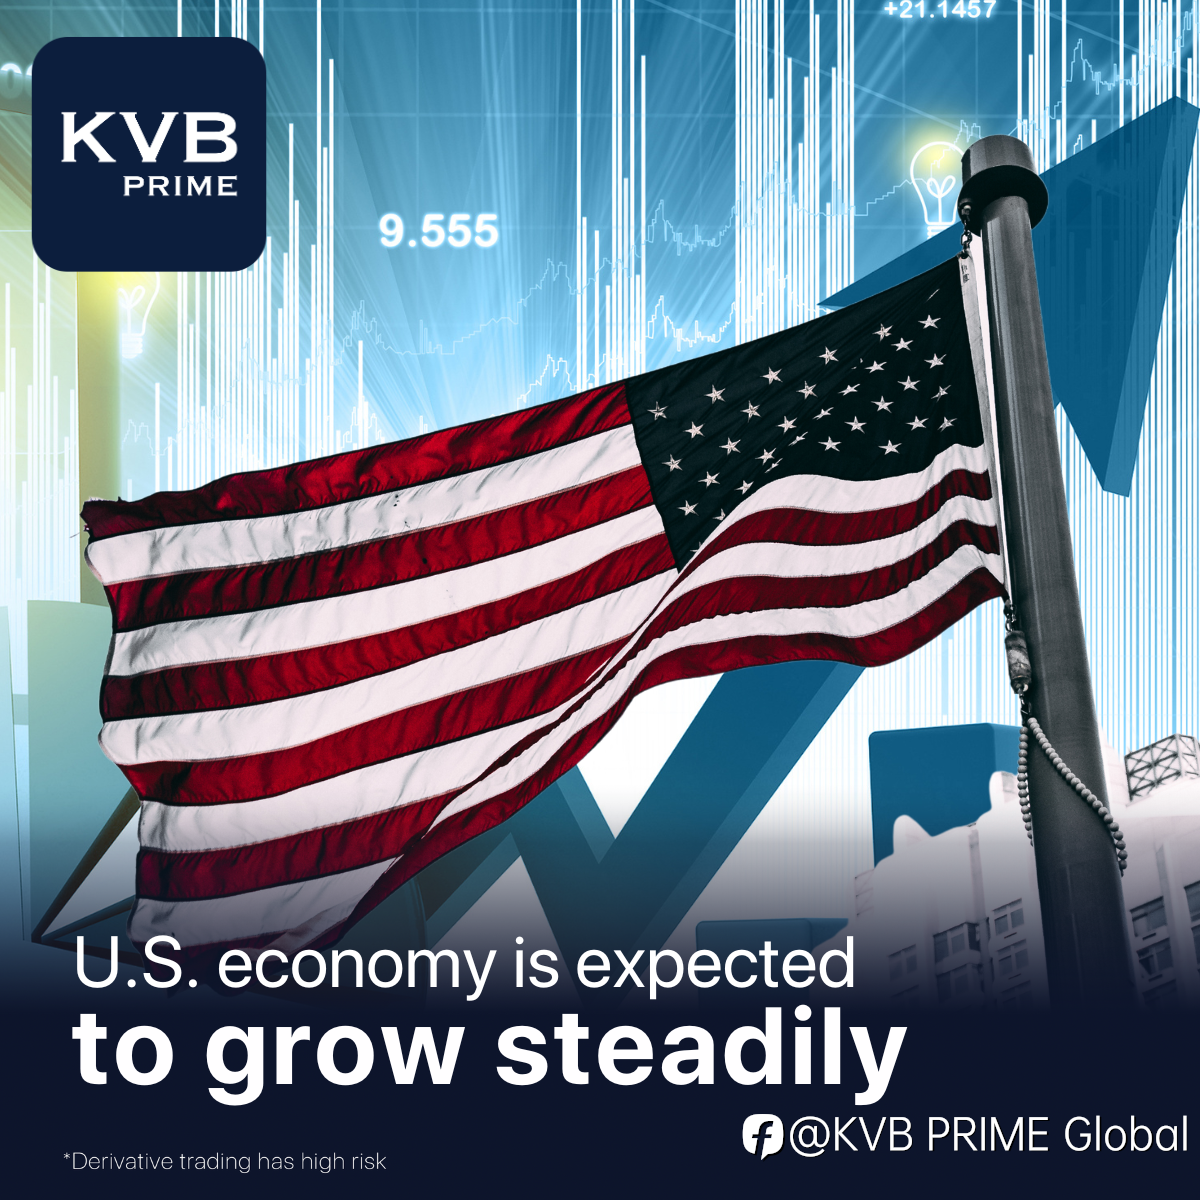 U.S. economy is expected to grow steadily